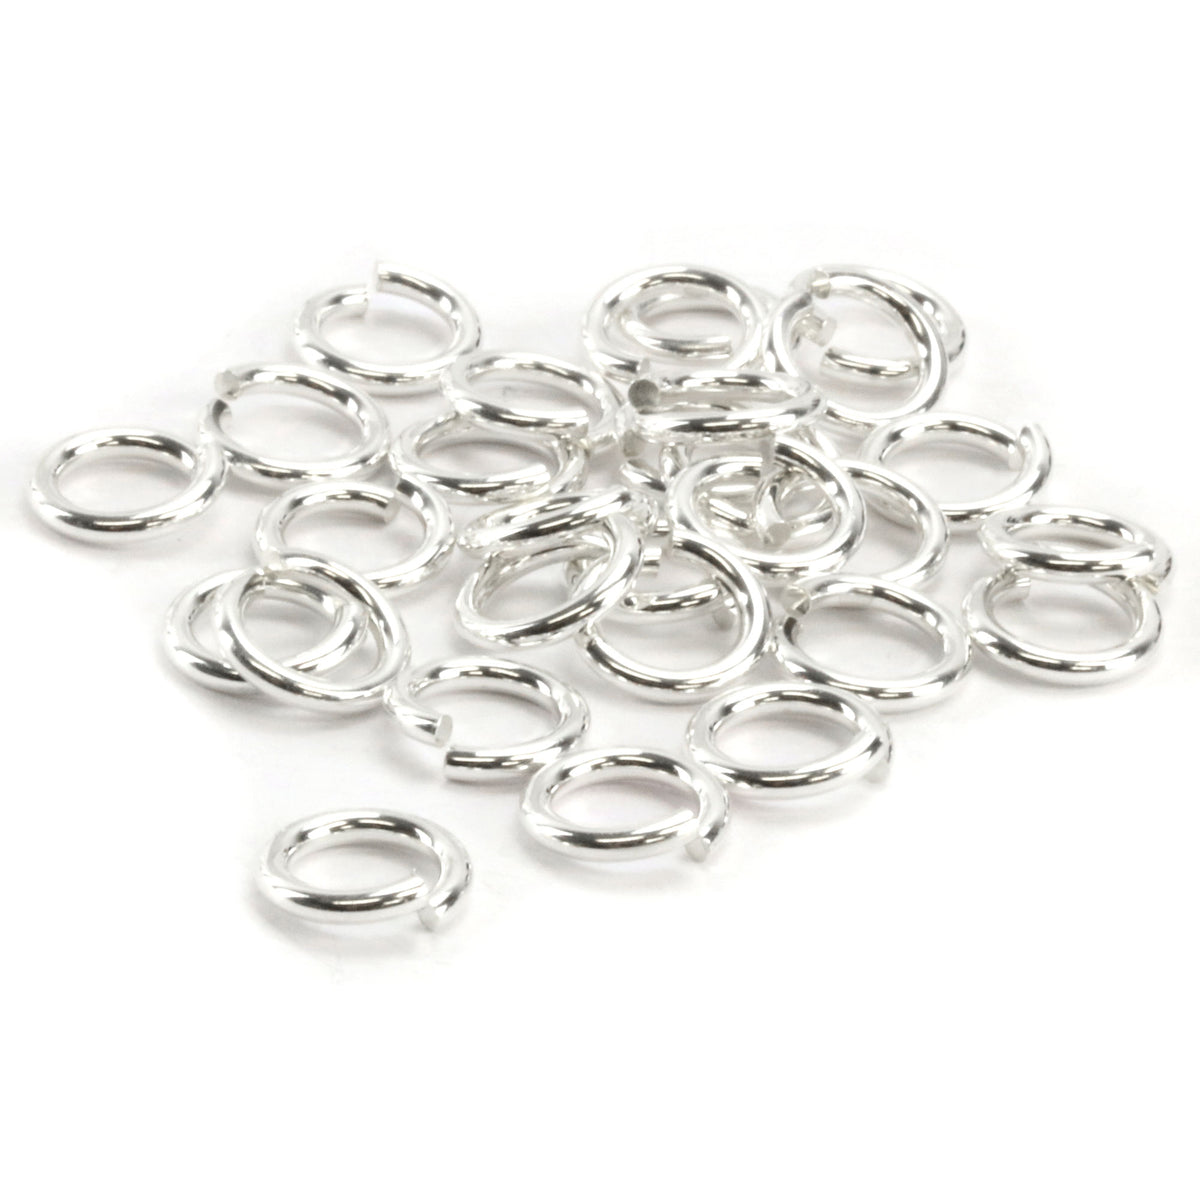 Gold/Bright Silver Jump Ring, 3mm/4mm/5mm/6mm/8mm/10mm/14mm, Jump Ring –  Bestbeads&Beyond